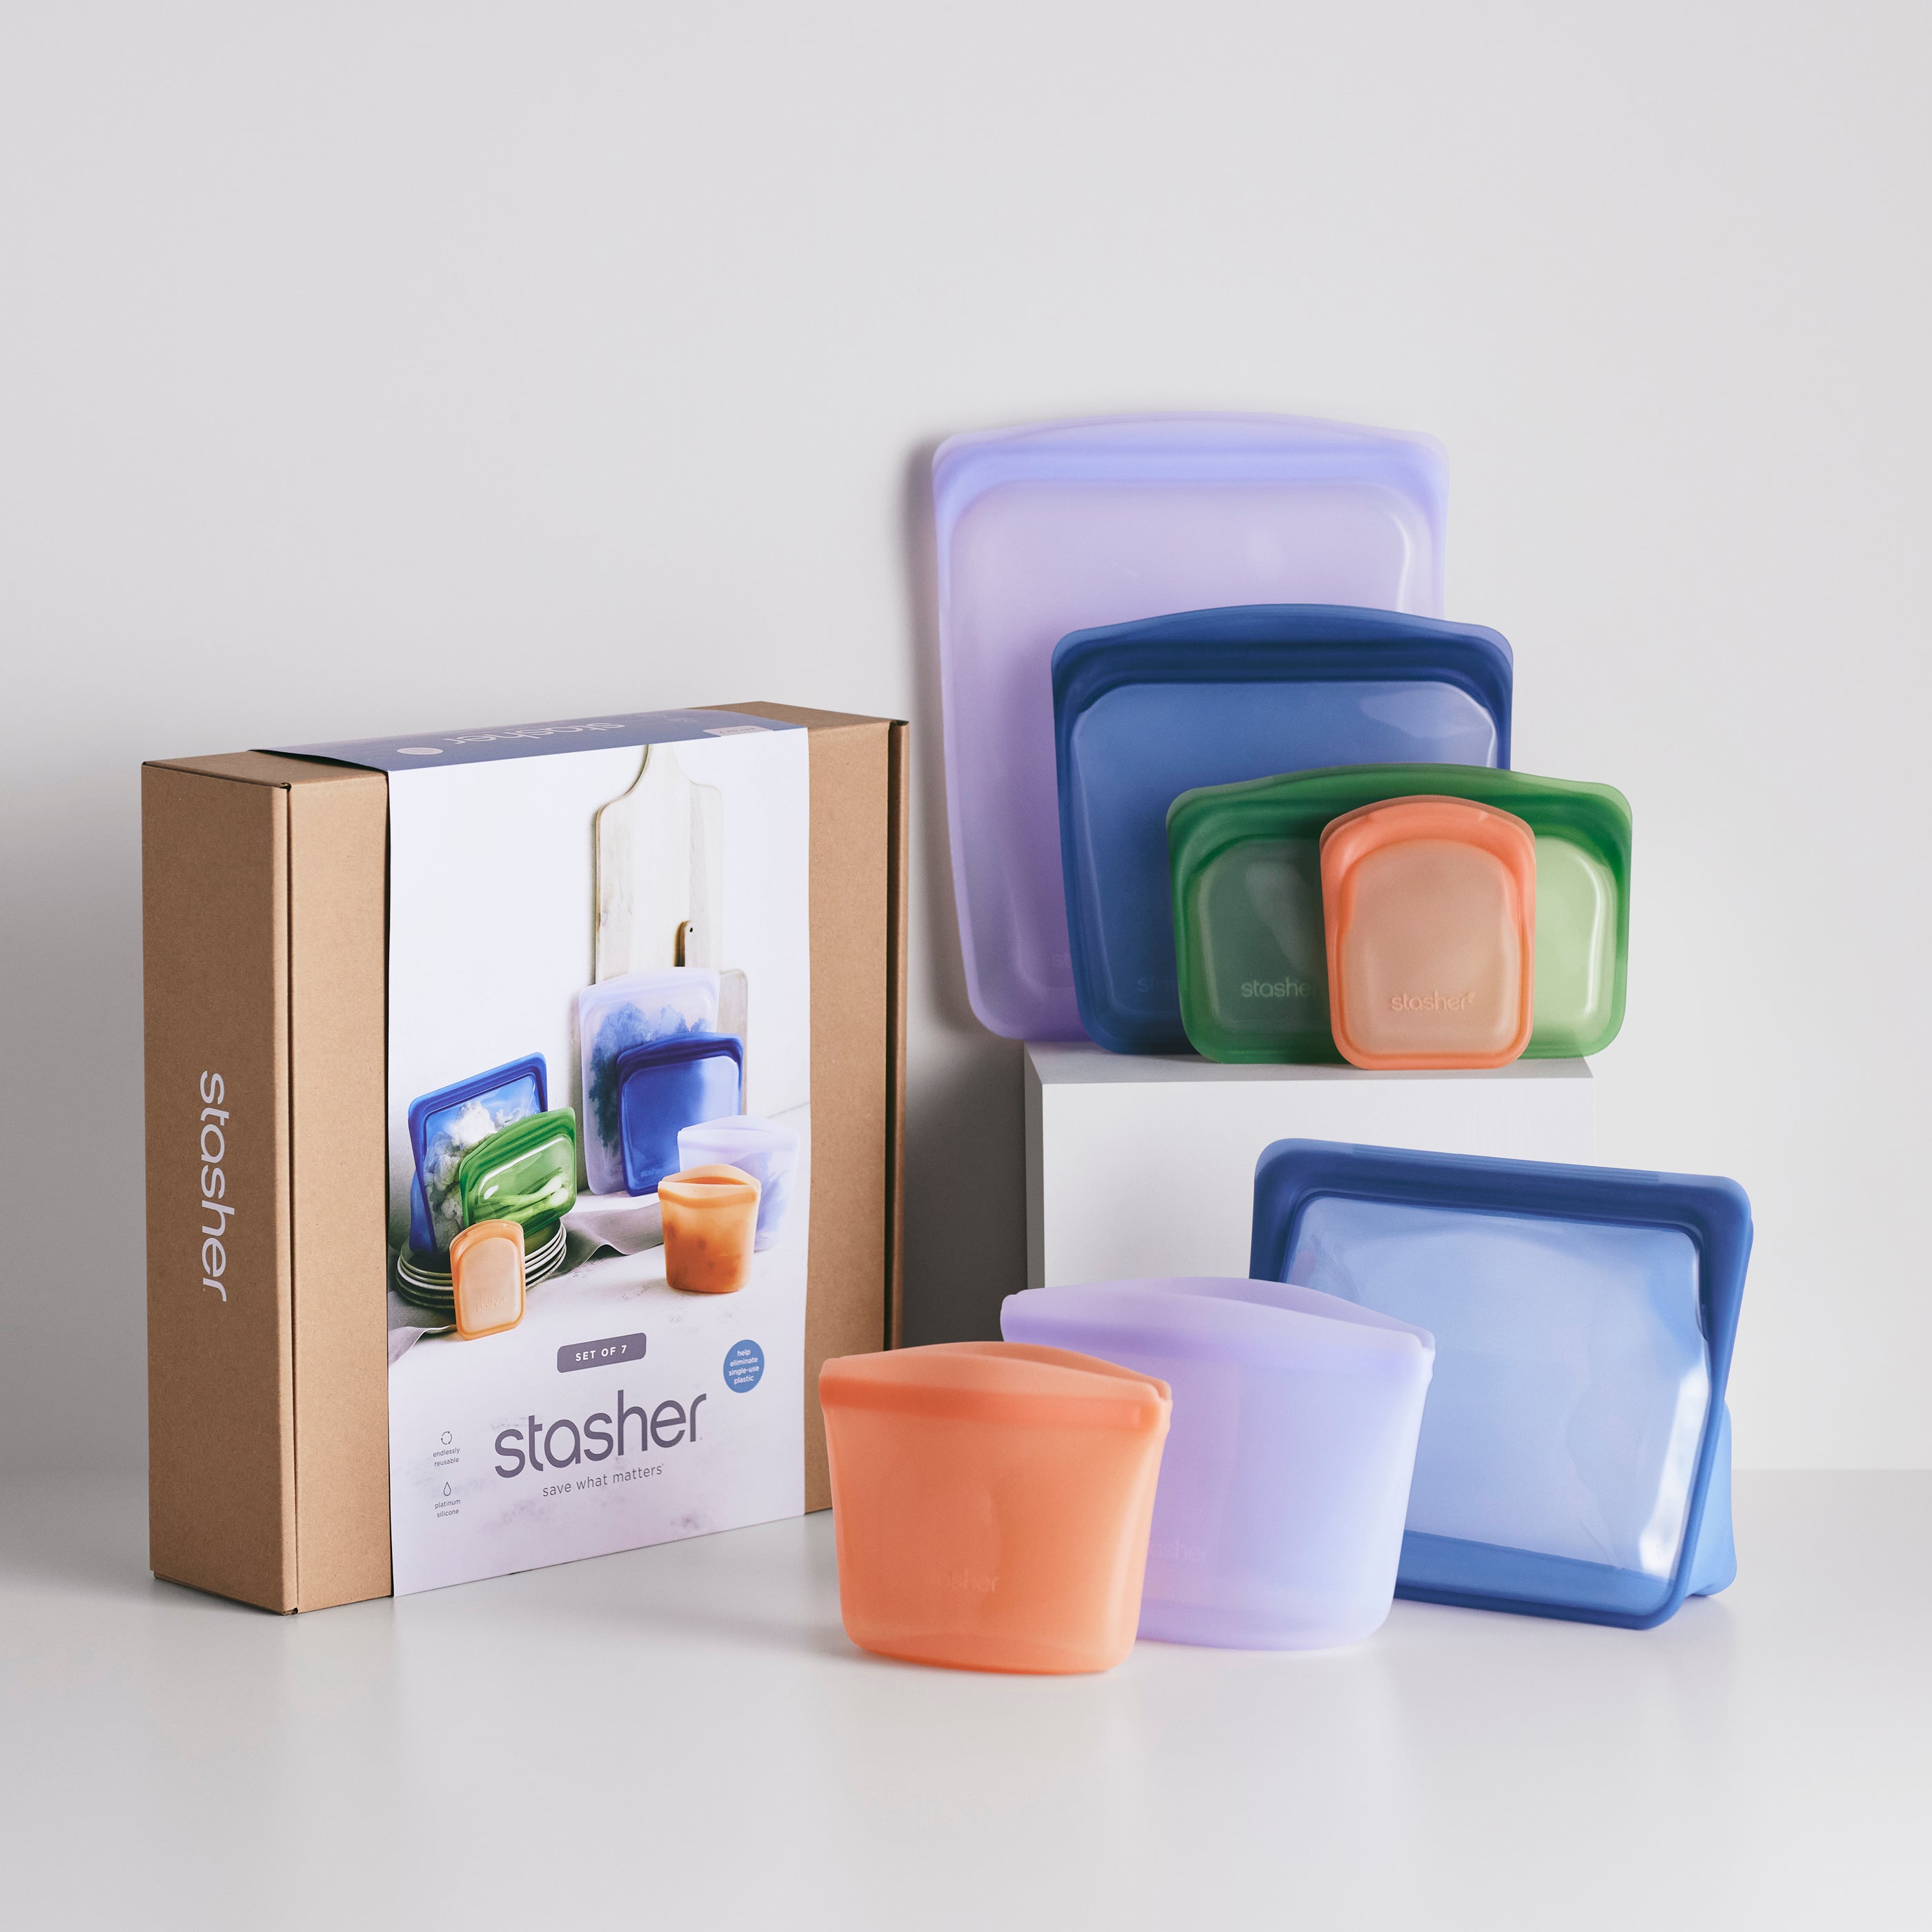 Zip Top Starter Bag Set in Gray - Reusable Silicone Bags & Containers